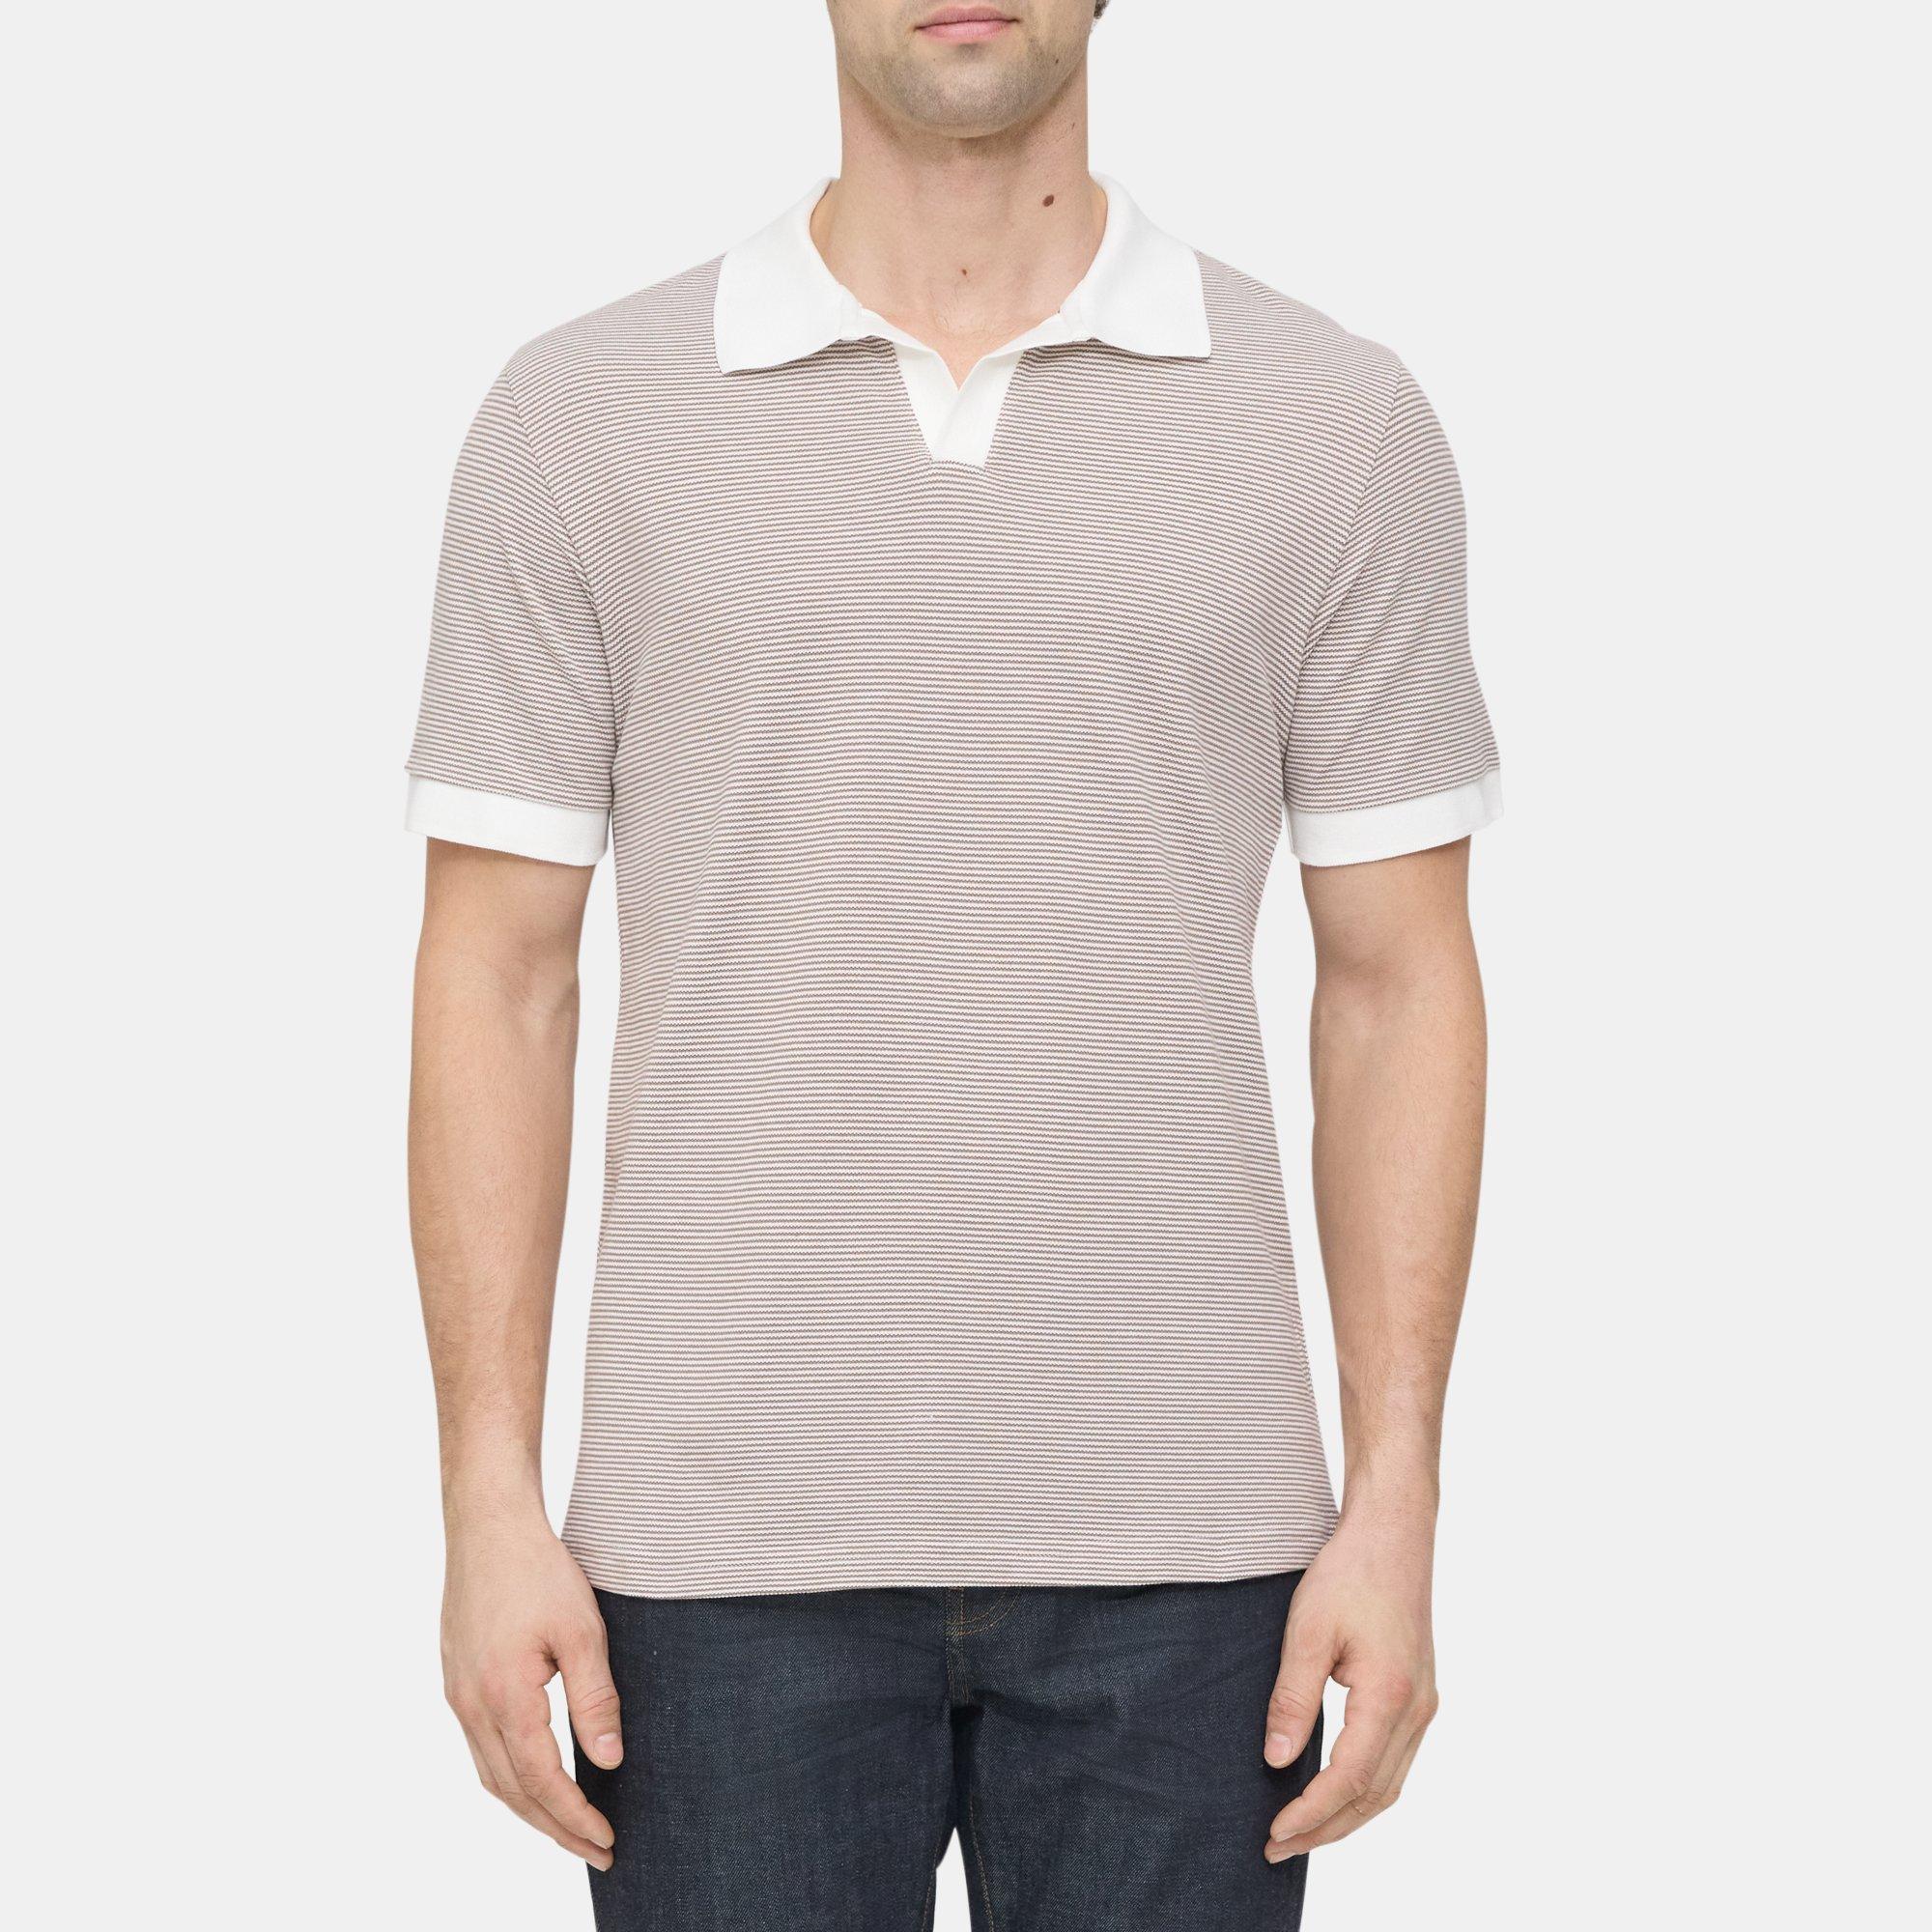 Theory Polo Shirt in Striped Cotton Pique